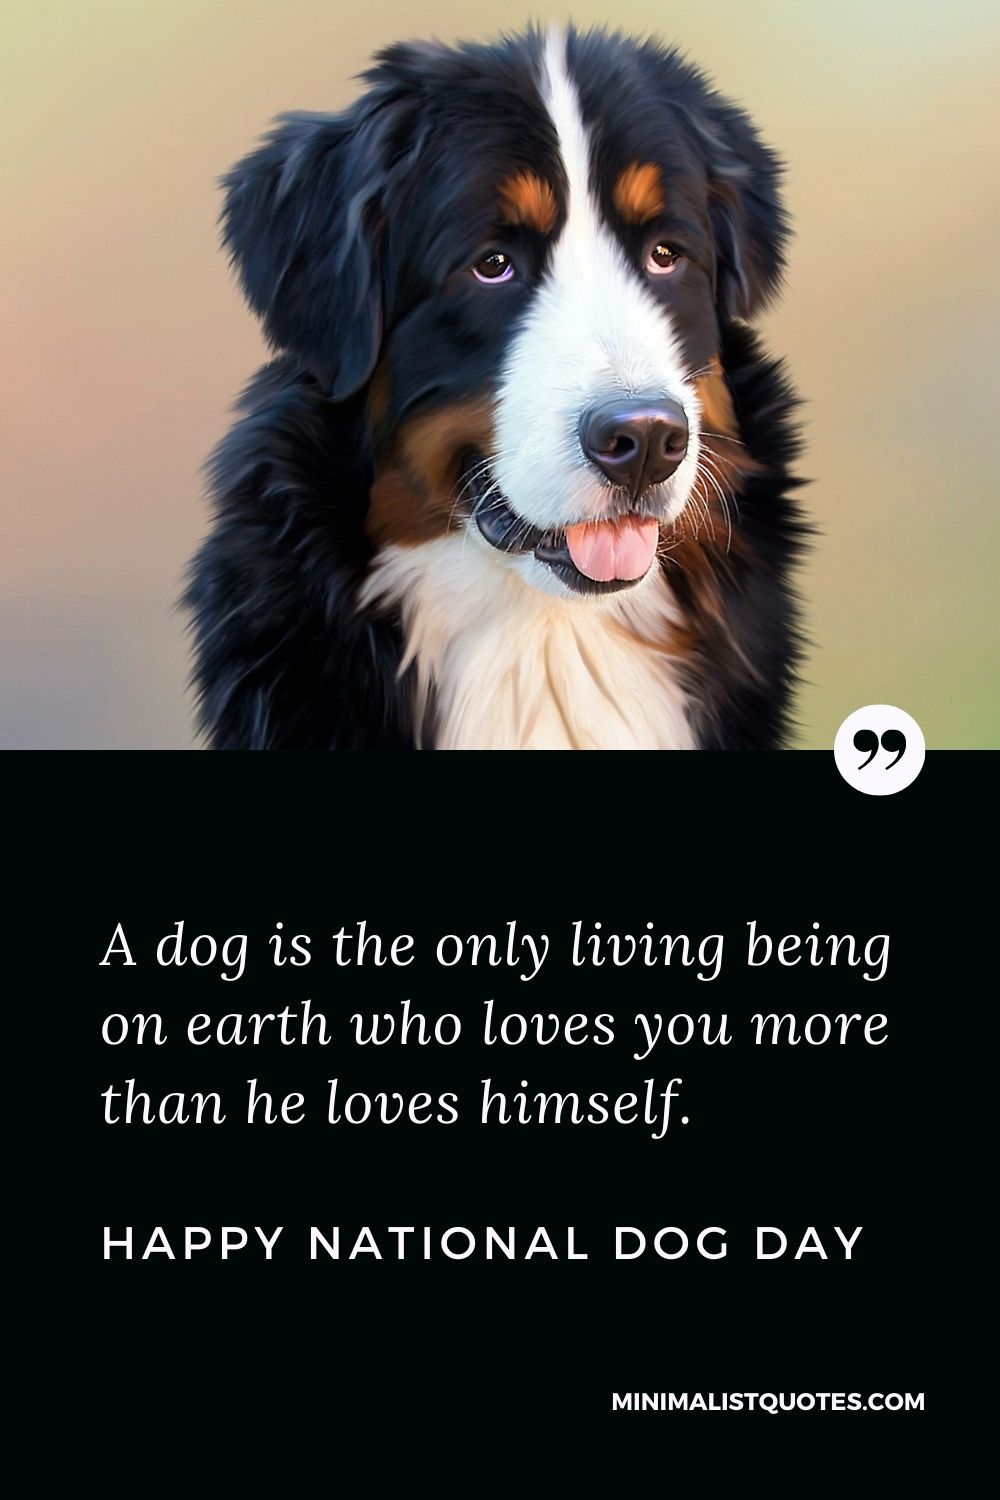 National Dog Day Quote, Wish & Message With Image: A dog is the only living being on earth who loves you more than he loves himself. Happy National Dog Day!